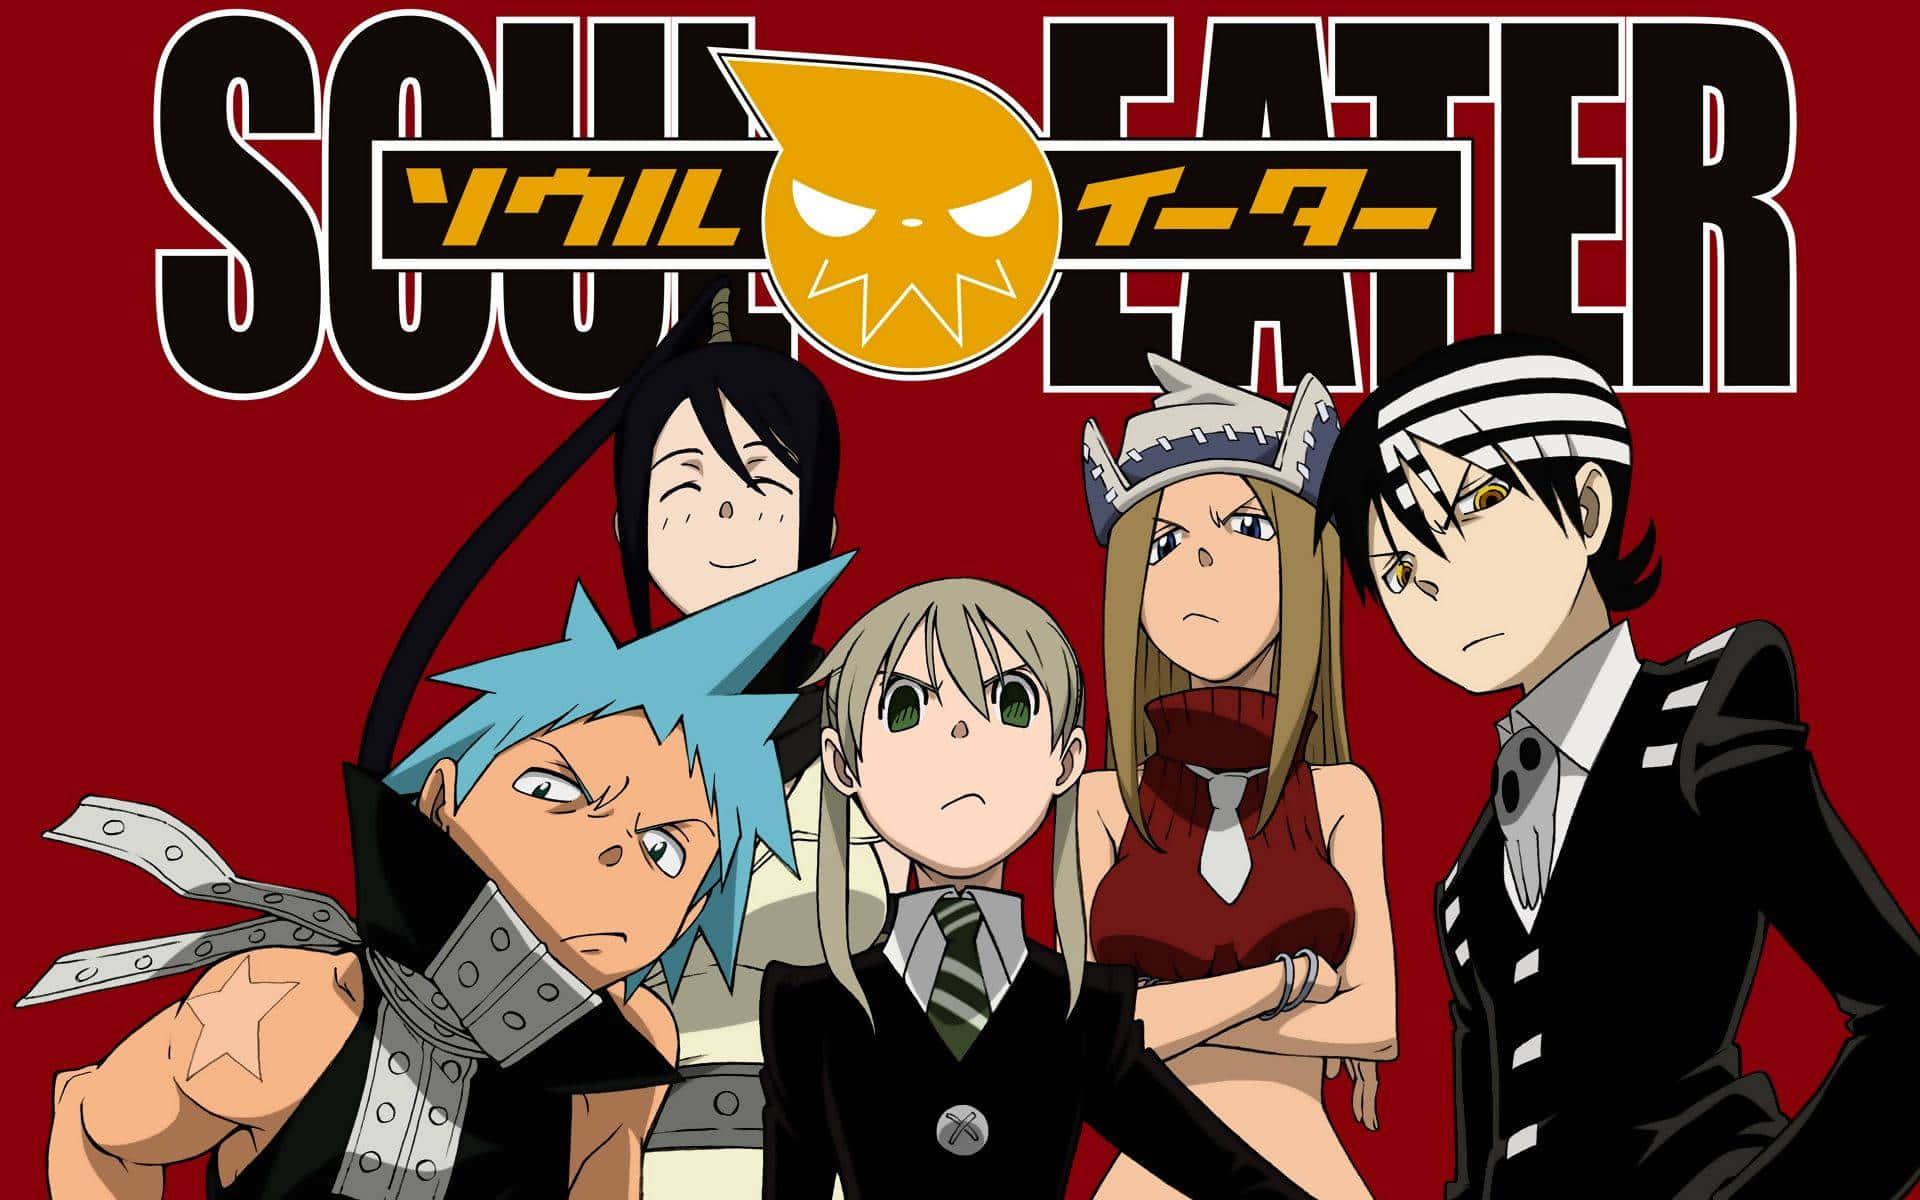 Souleater Anime Serie Hd Baggrund.